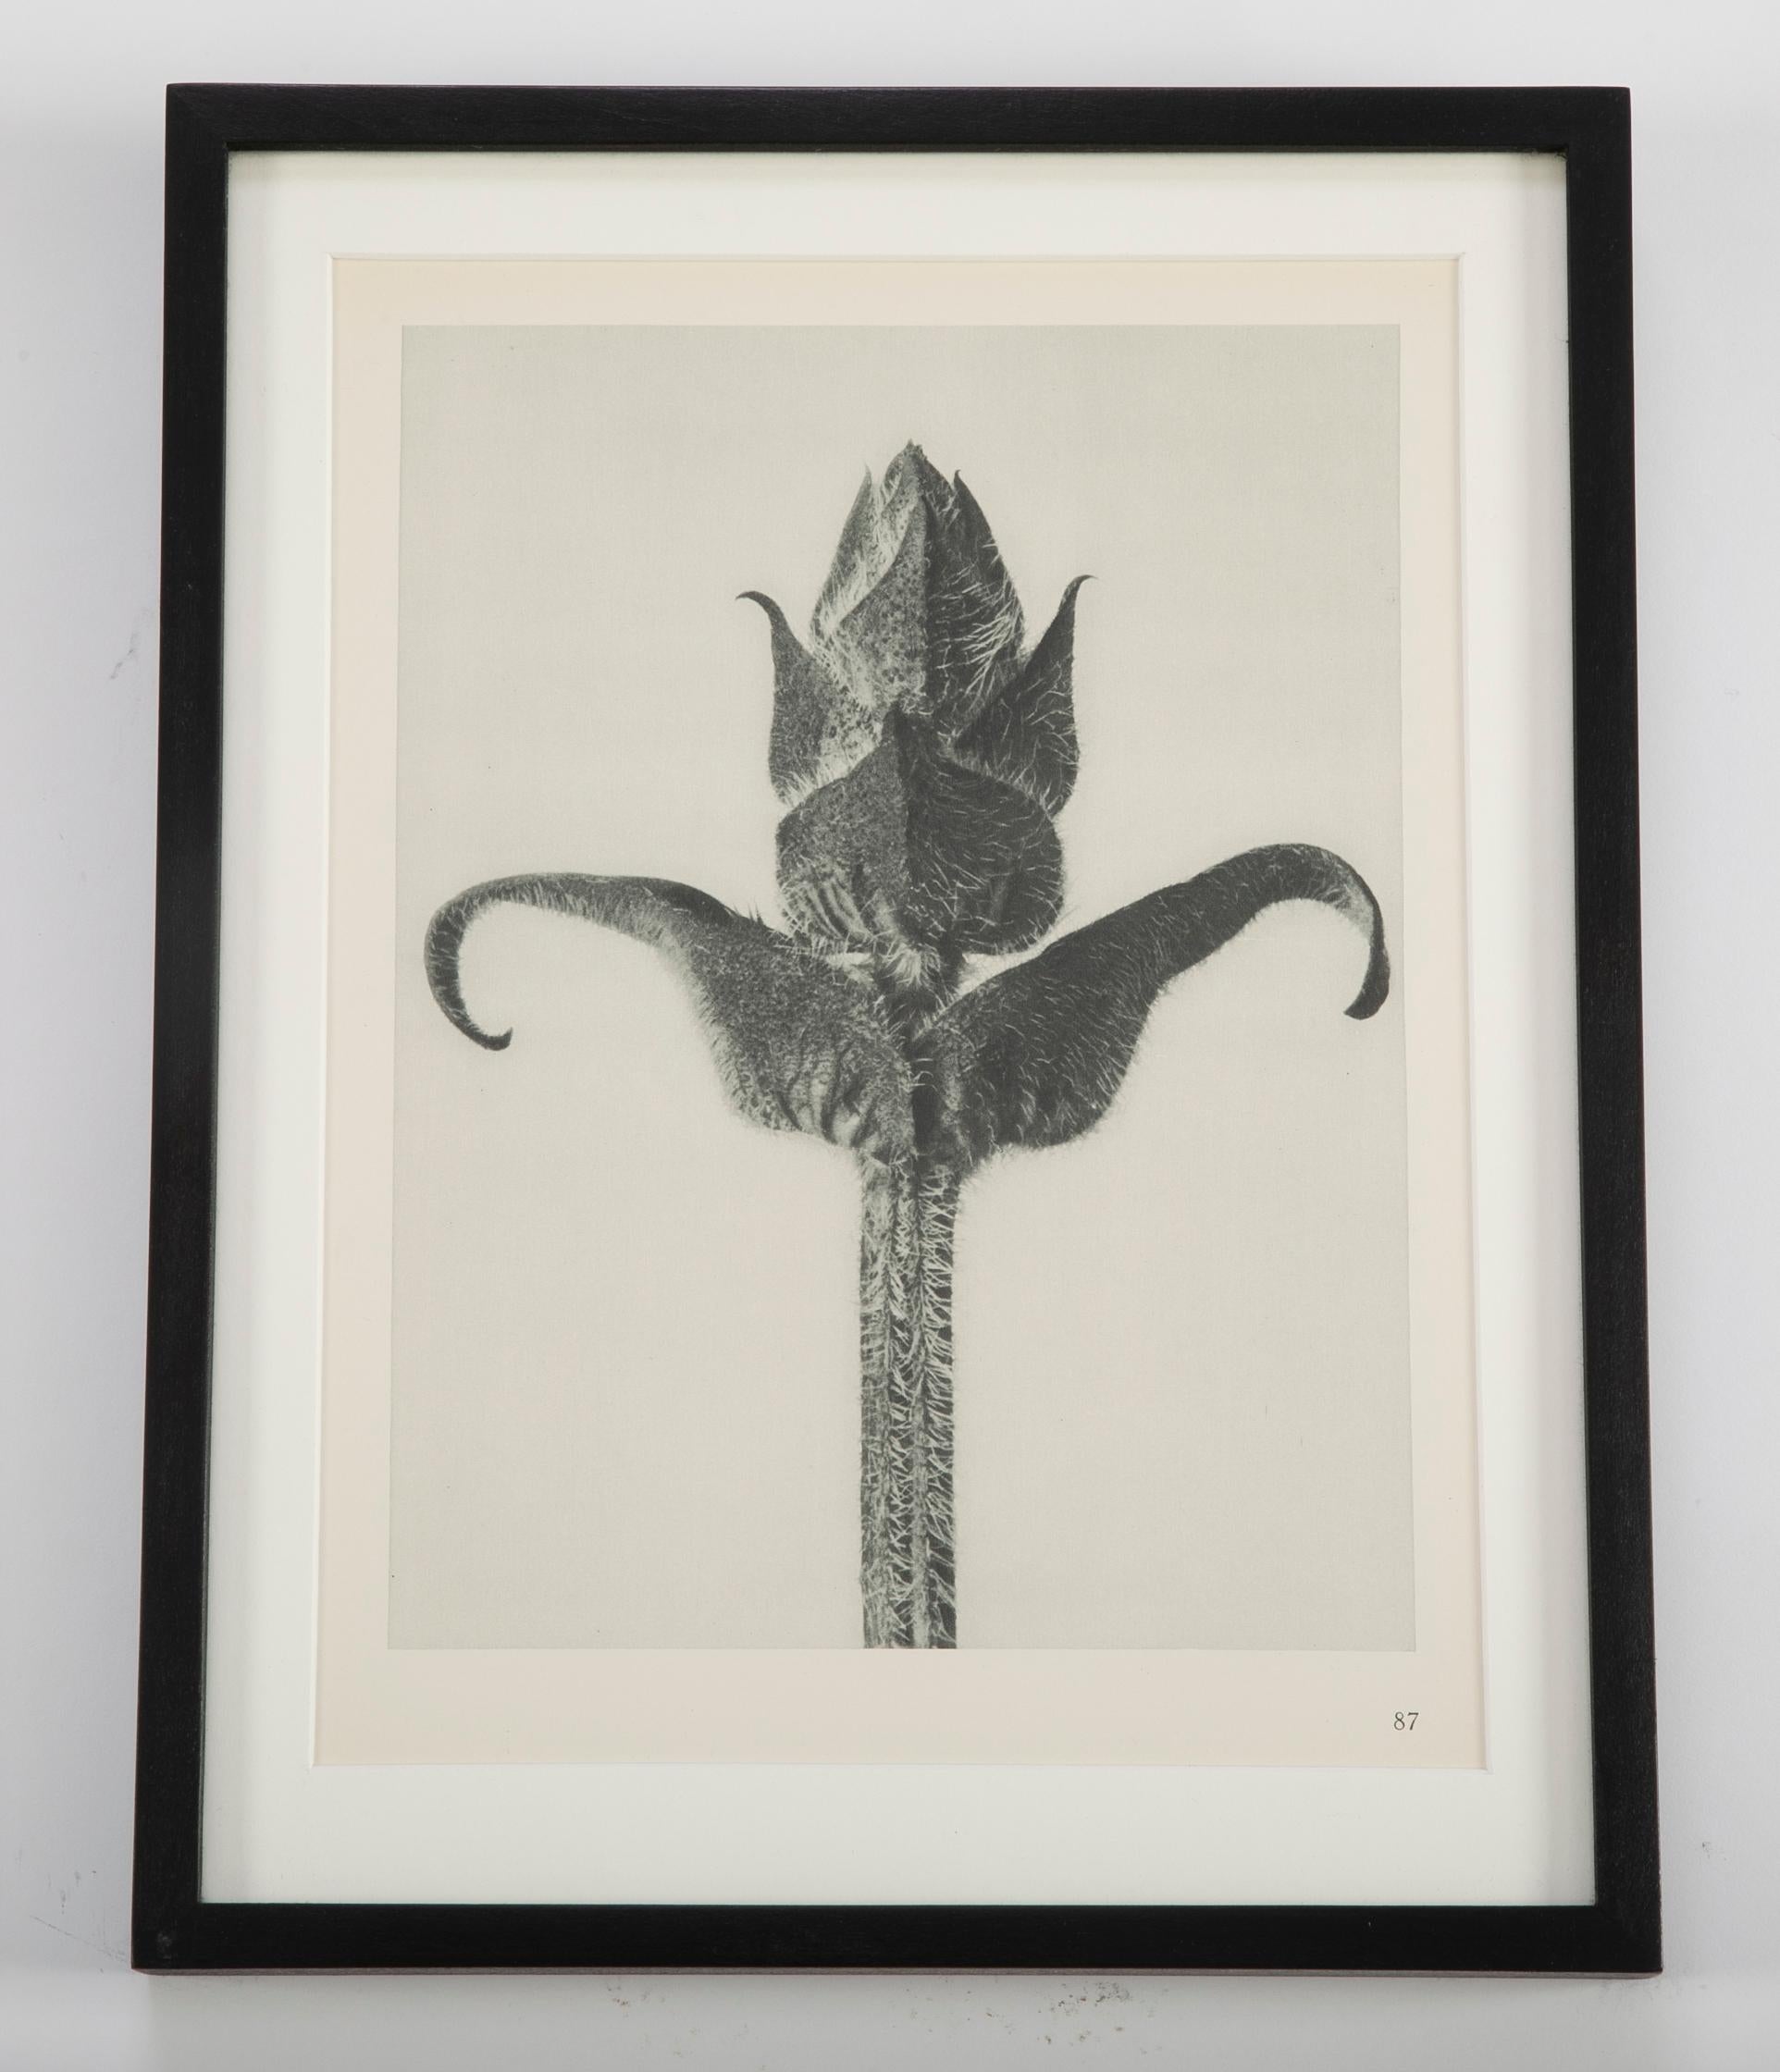 12 botanical photogravures by Karl Blossfeldt (German, b. 1914 - d. 1932), First Edition 1928, Berlin. Blossfeldt was a well-known artist, teacher, sculptor and photographer; best known for his closeup photographs of plant life. Hung together, these